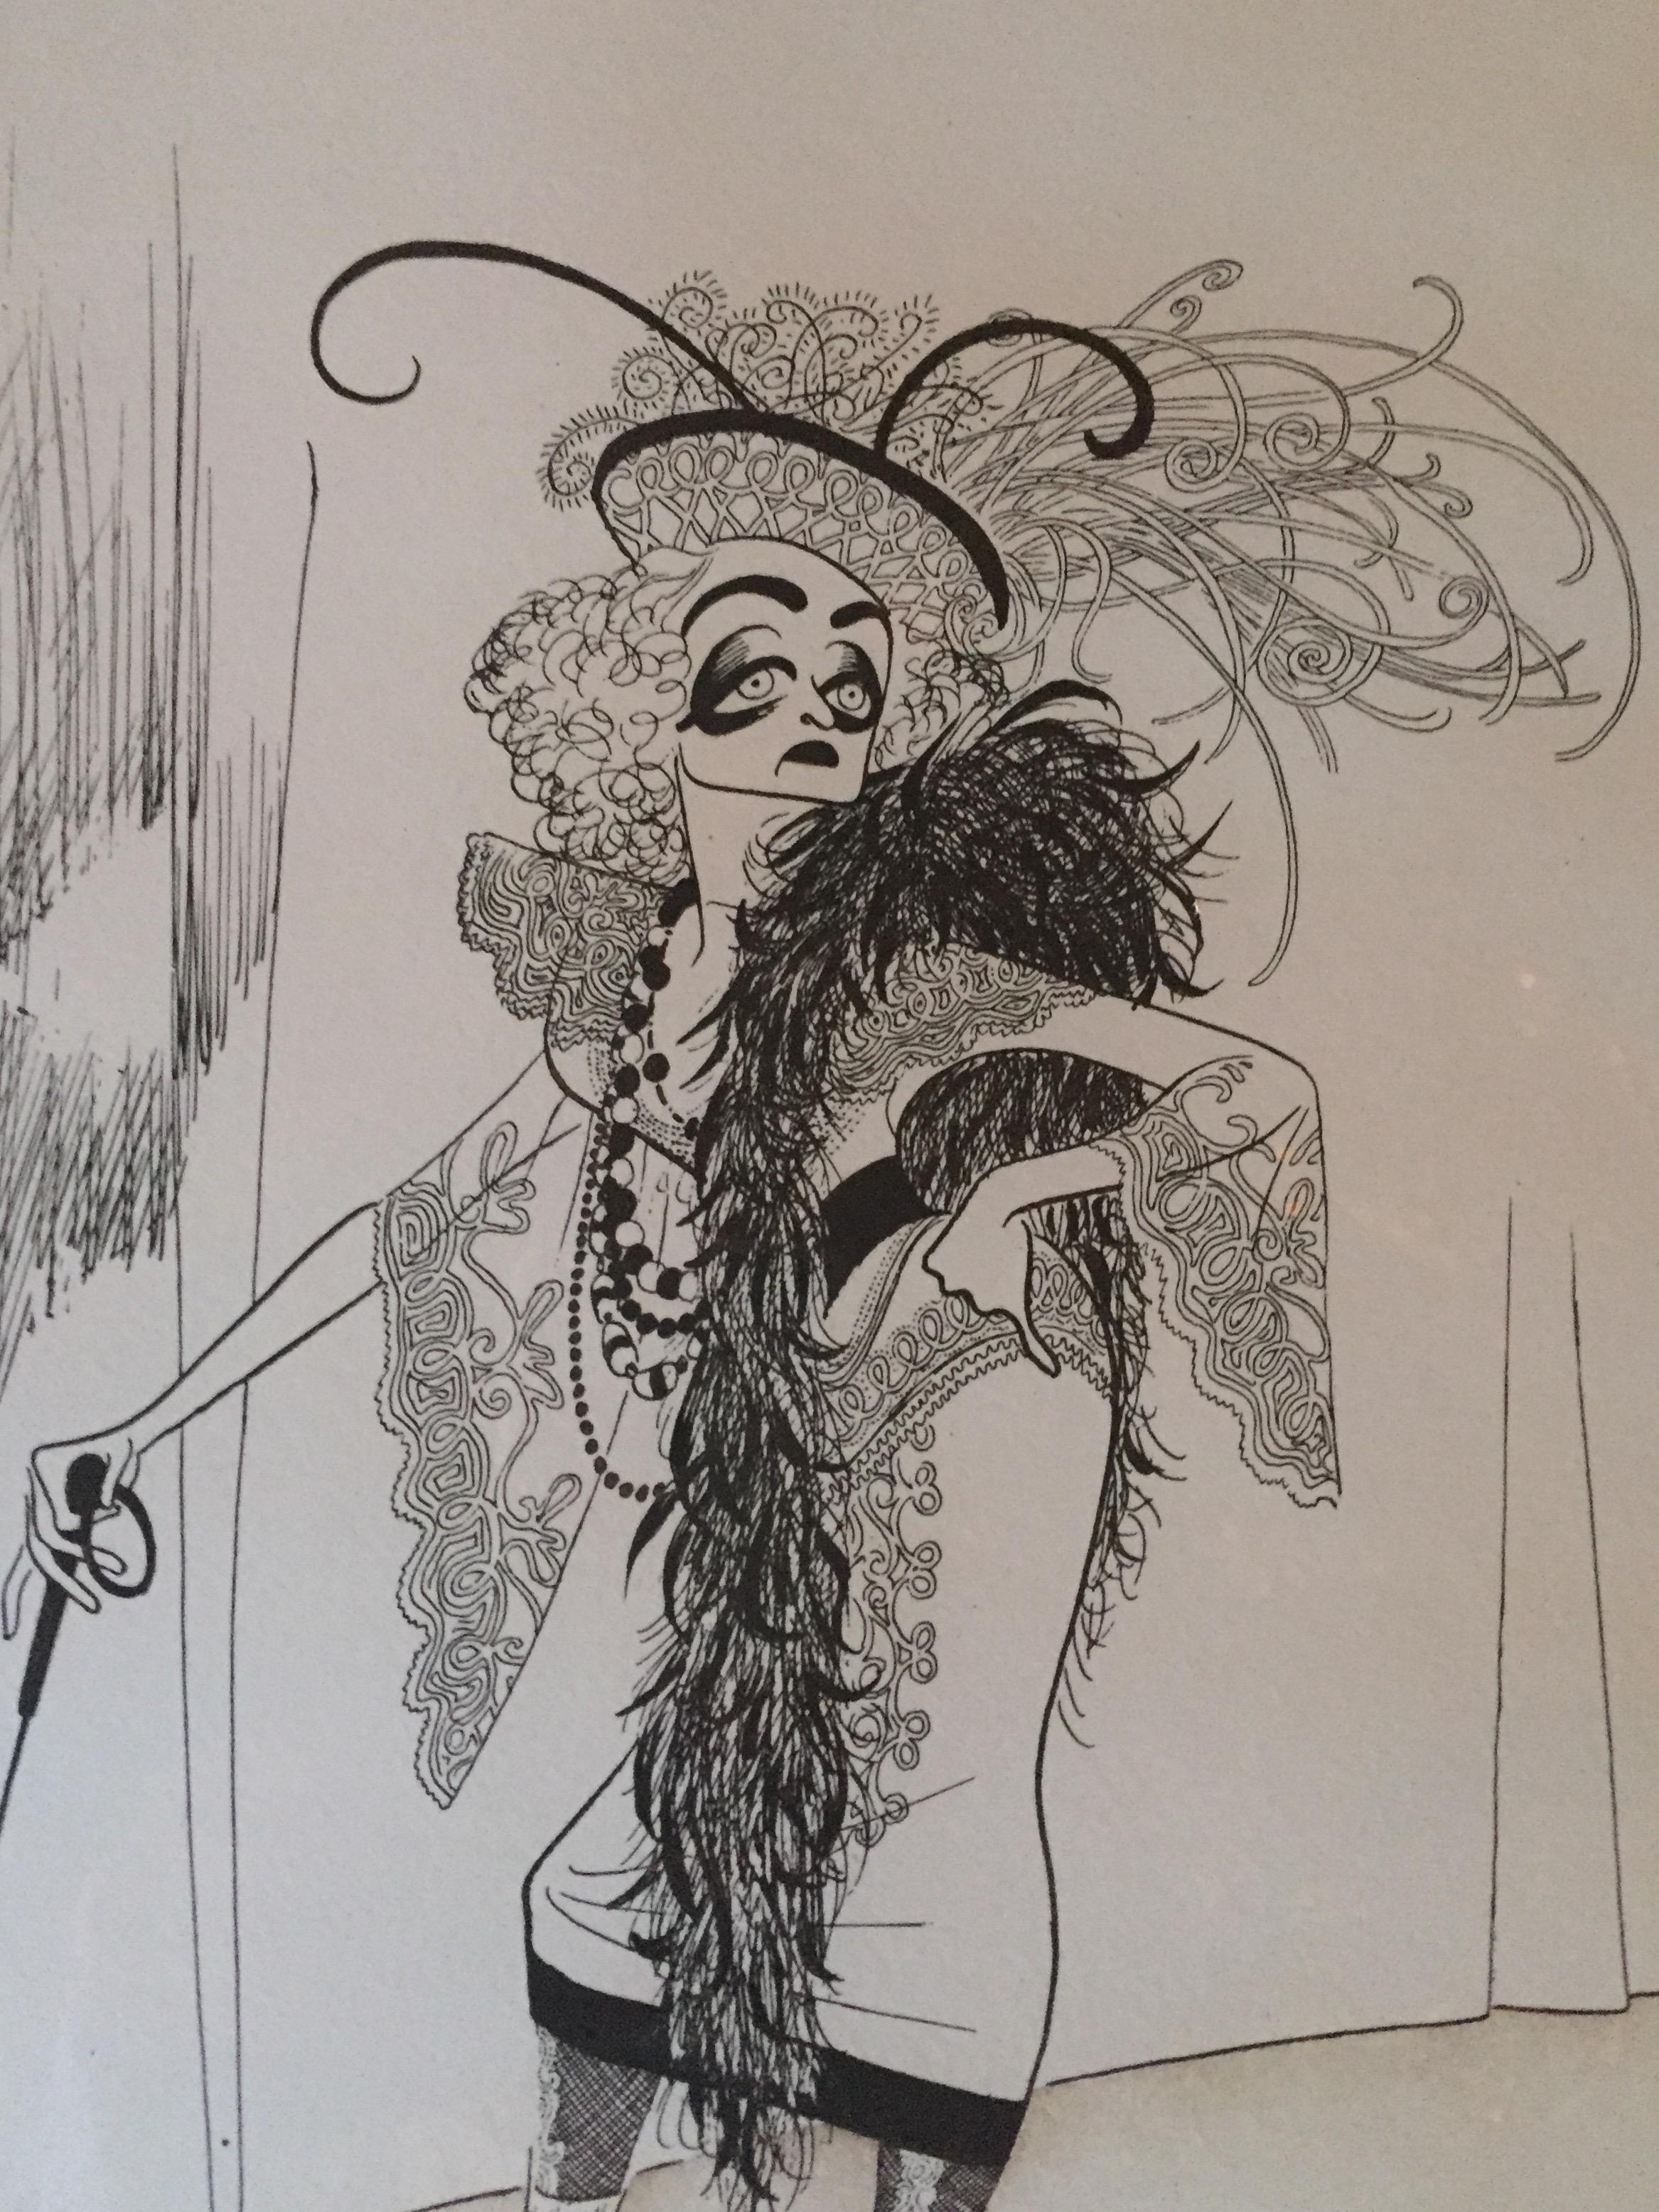 Wonderful hand signed limited edition etching by the iconic cartoon artist Al Hirschfeld, where the subject matter is Bette Davis decked out in feathered hat, spike high heels and umbrella.
Signed, AP XXVIII  (28/30)
14 x 10.5 etching itself